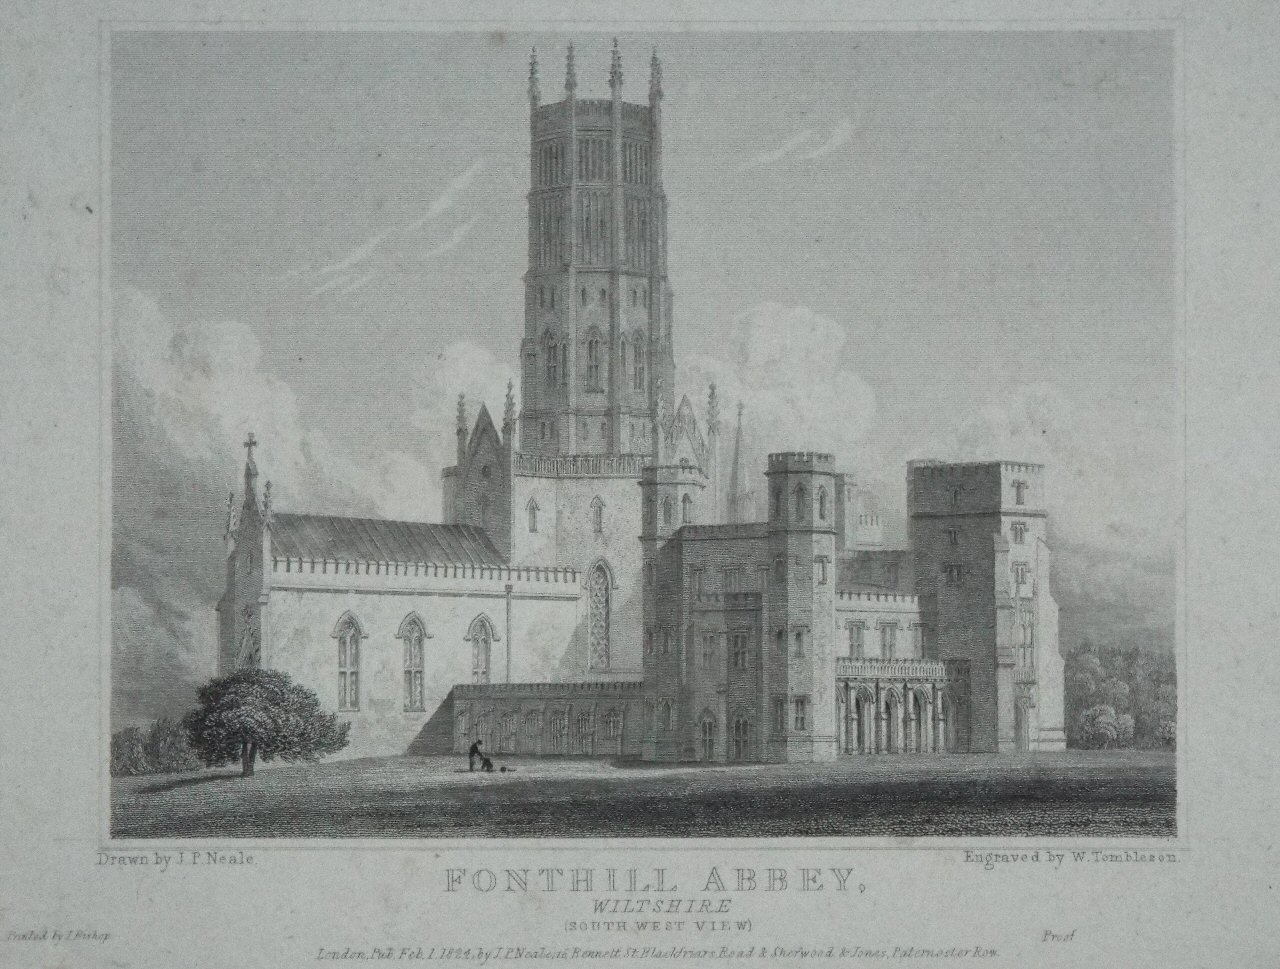 Print - Fonthill Abbey, Wiltshire (South West View) - Tombleson